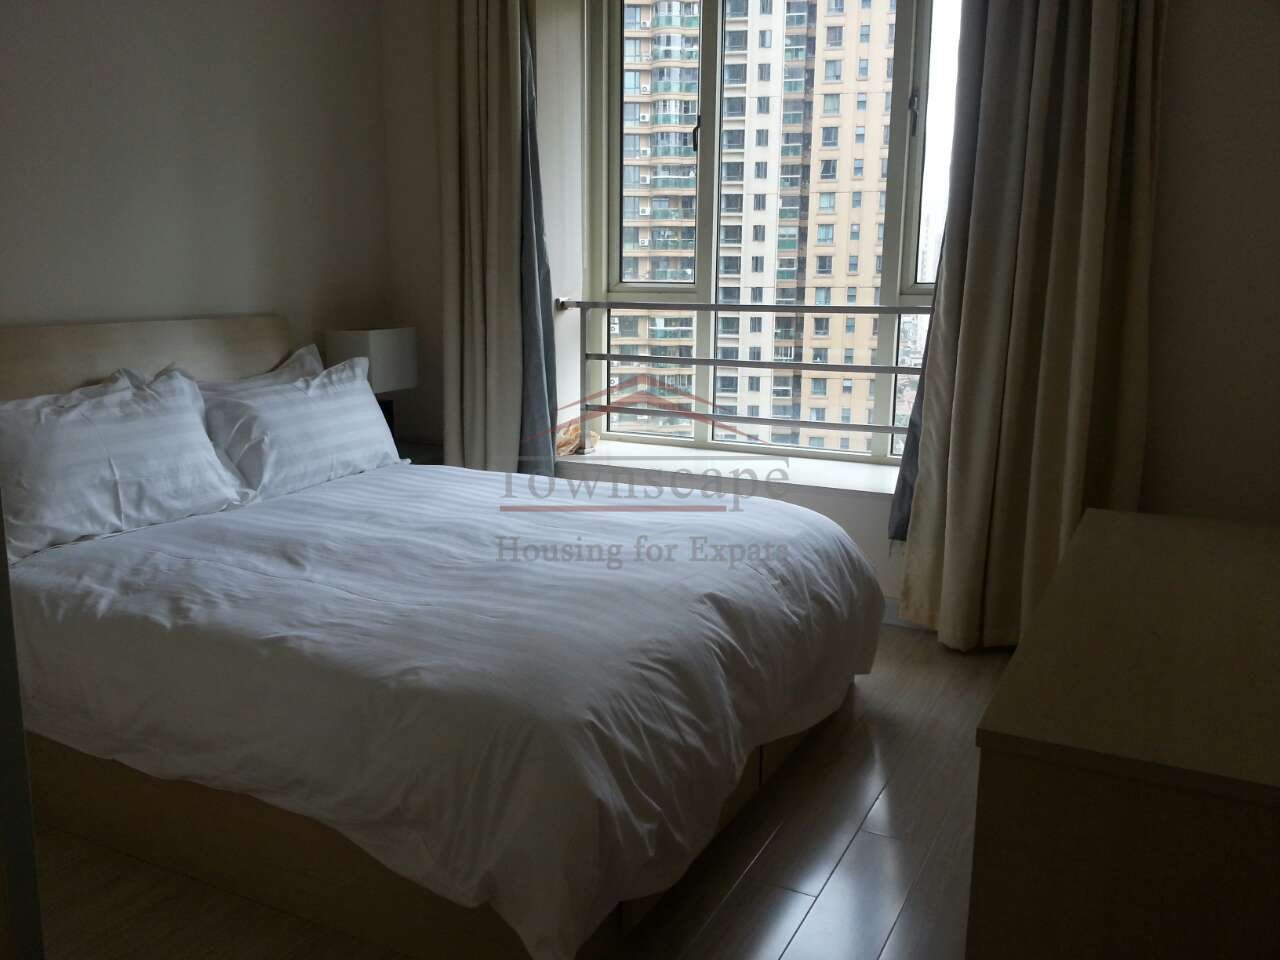 Rent house in Shanghai Spotless 2 bedroom apartment at West Nanjing Road L2